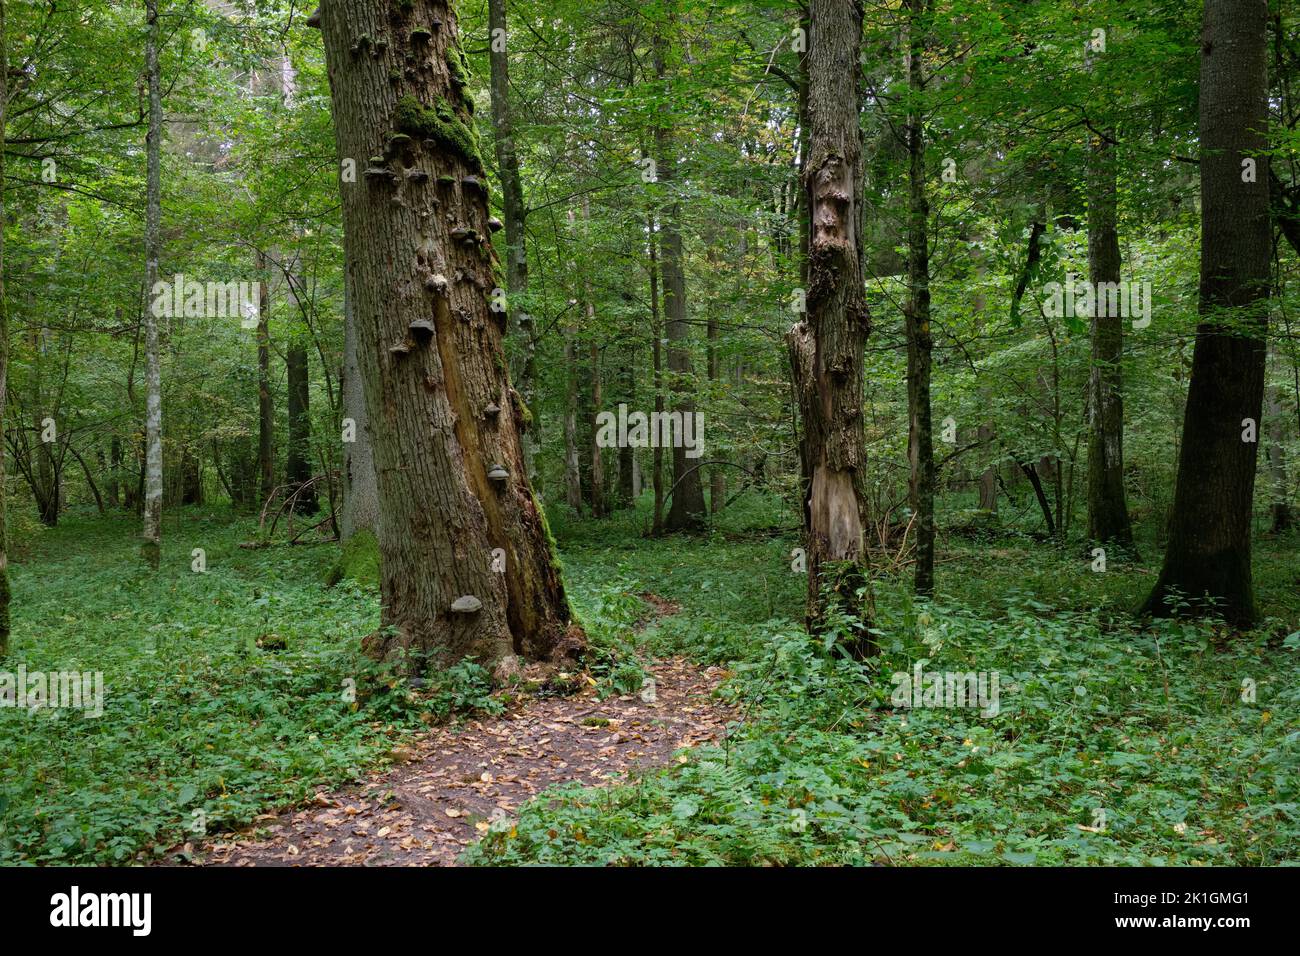 Shady deciduous tree stand with old linden tree with fungus grows over in background, Bialowieza Forest, Poland, Europe Stock Photo